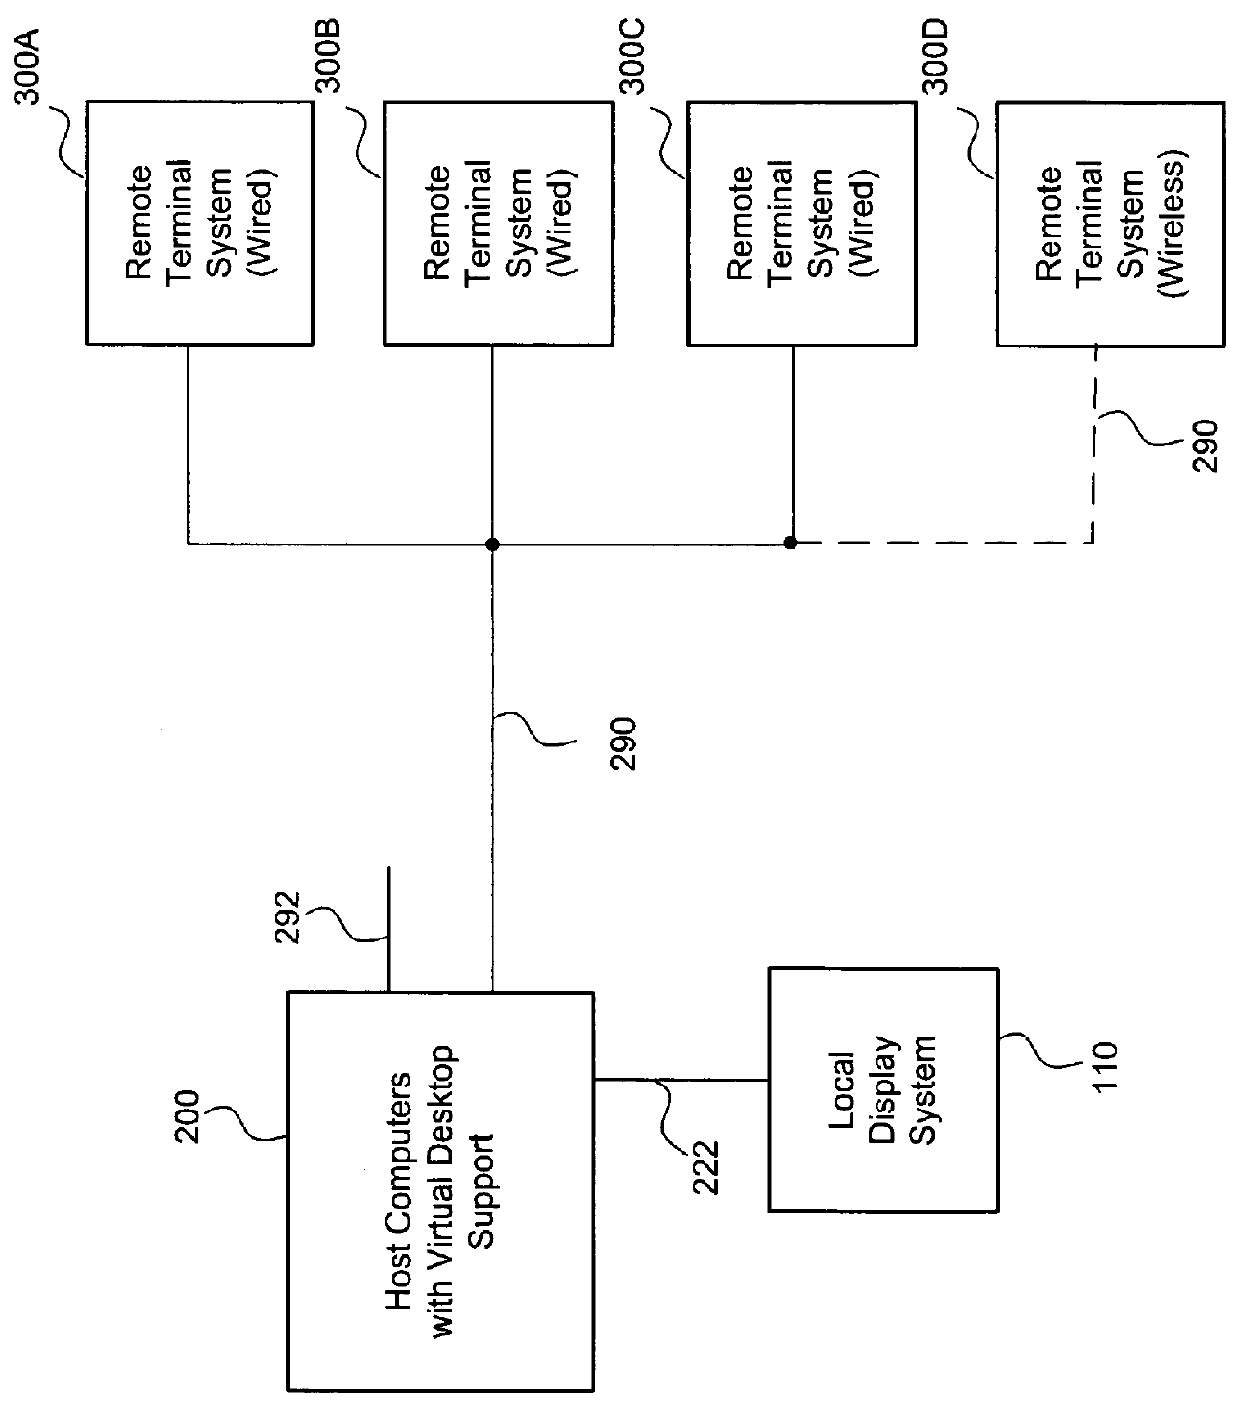 Graphics display system for multiple remote terminals